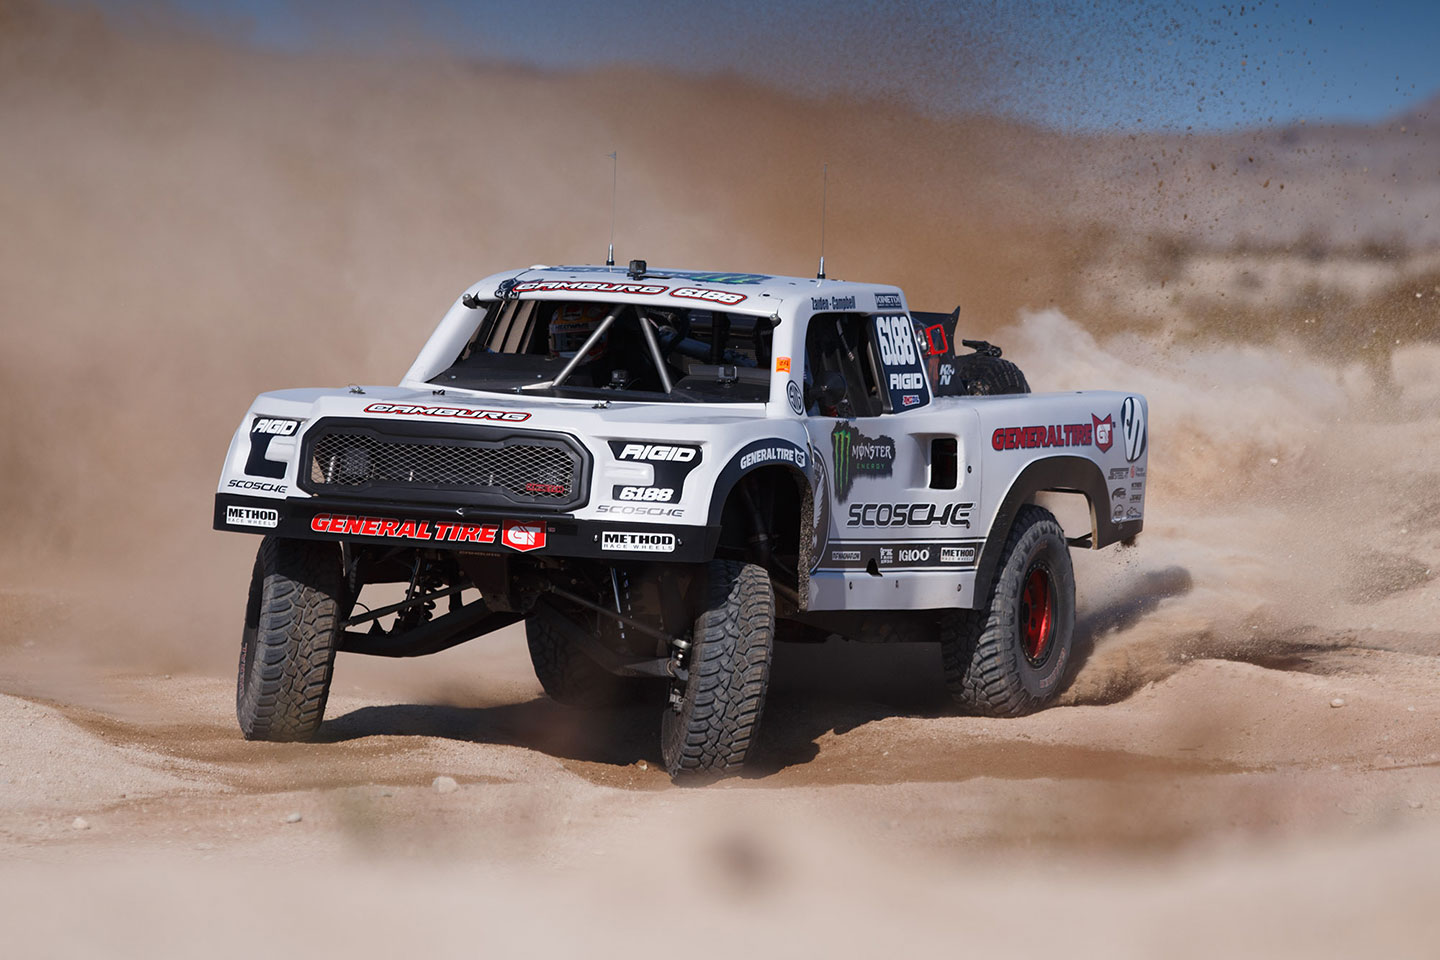 Desert Racing, Classic Cars and More